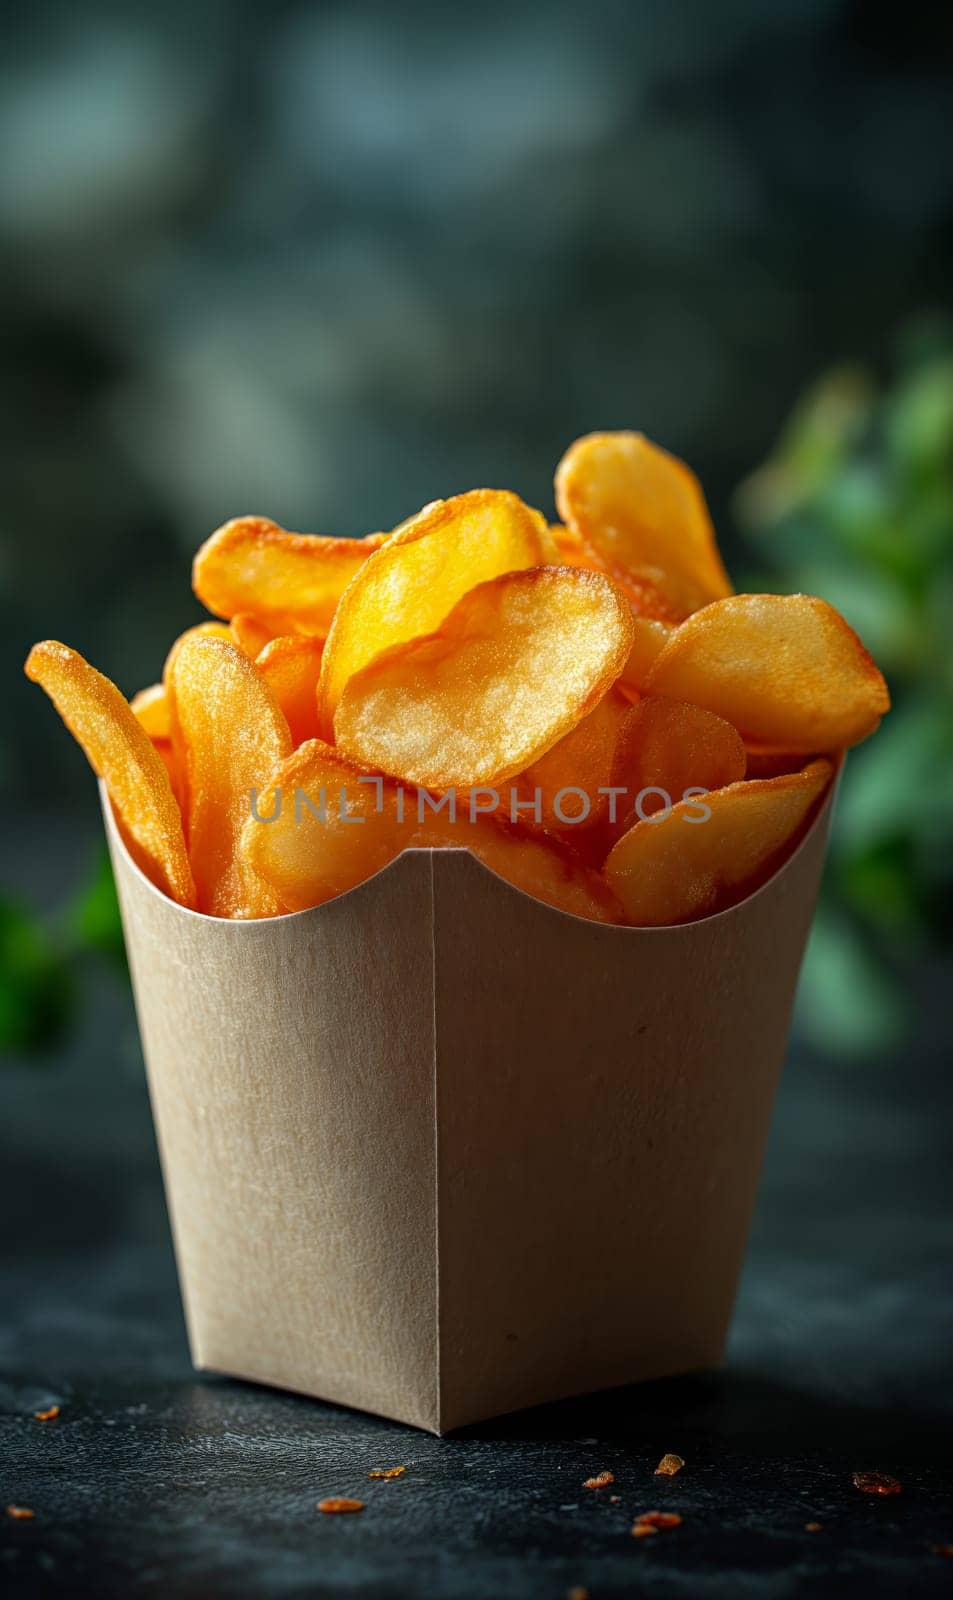 Potato Chips in a Paper Bag on Table. Selective focus.